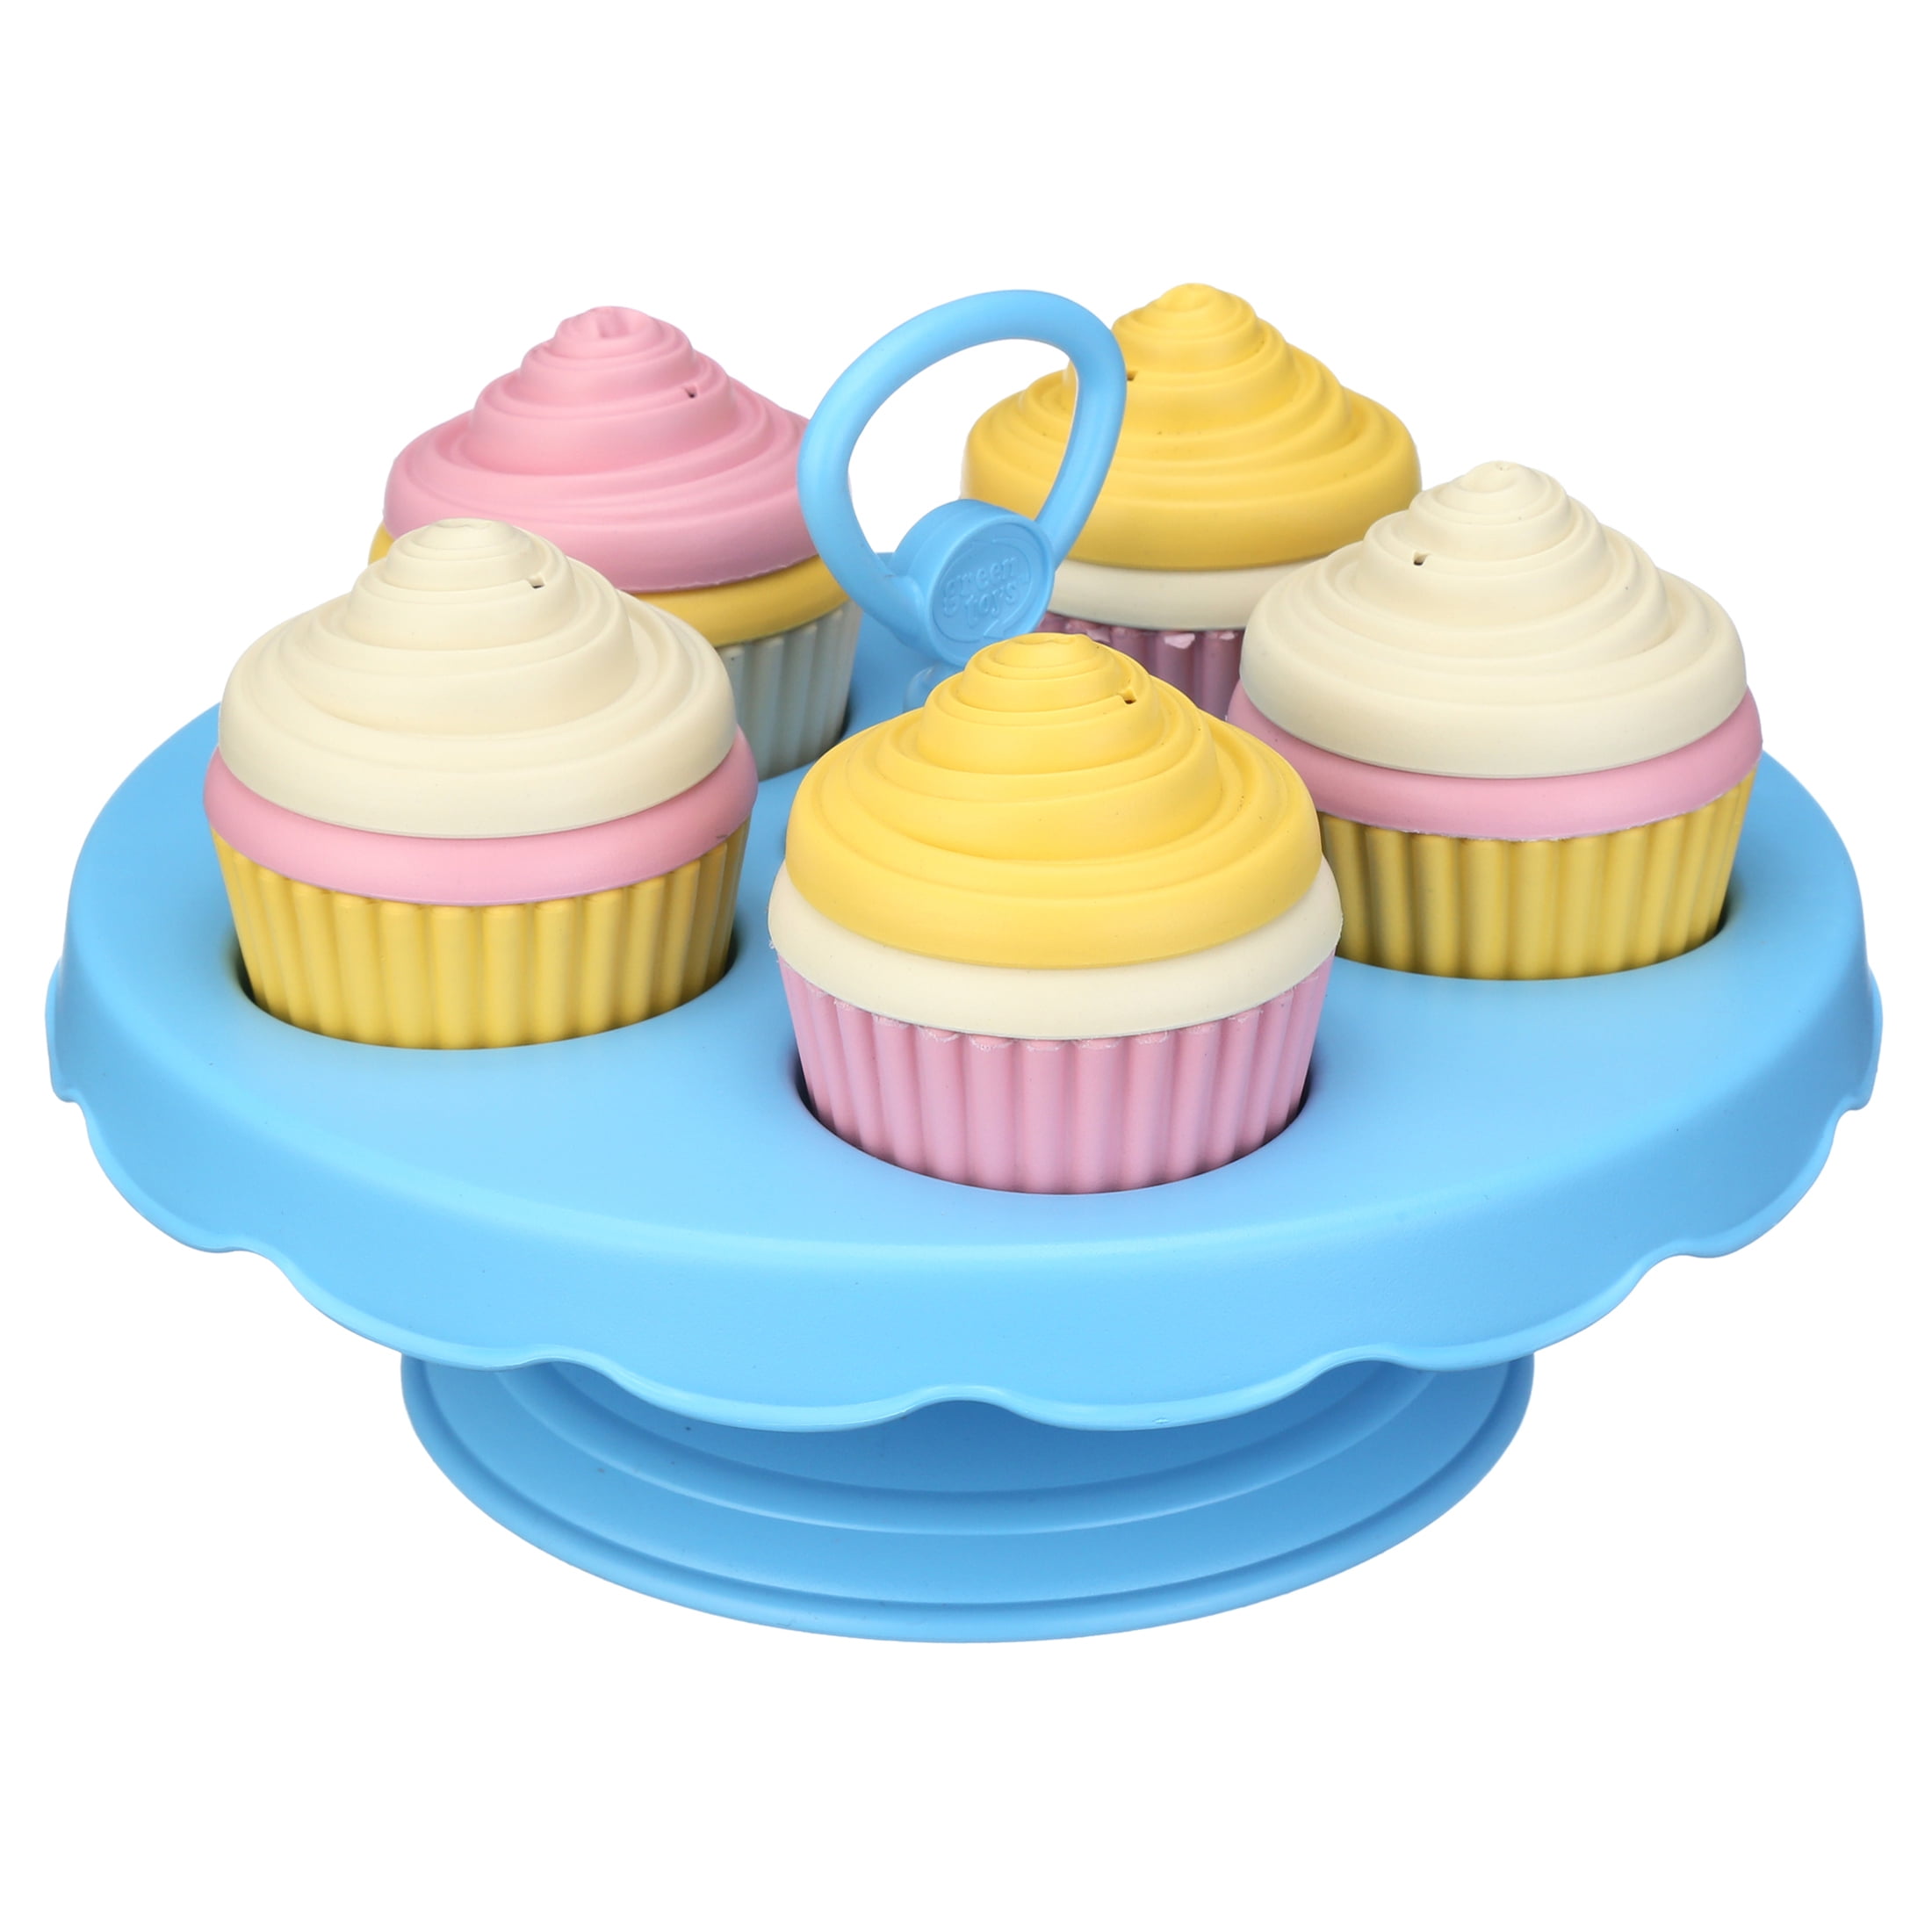 Chad Valley CHAD VALLEY CUPCAKE BAKING SET WITH TURNTABLE STAND FOR DISPLAY BRAND NEW 